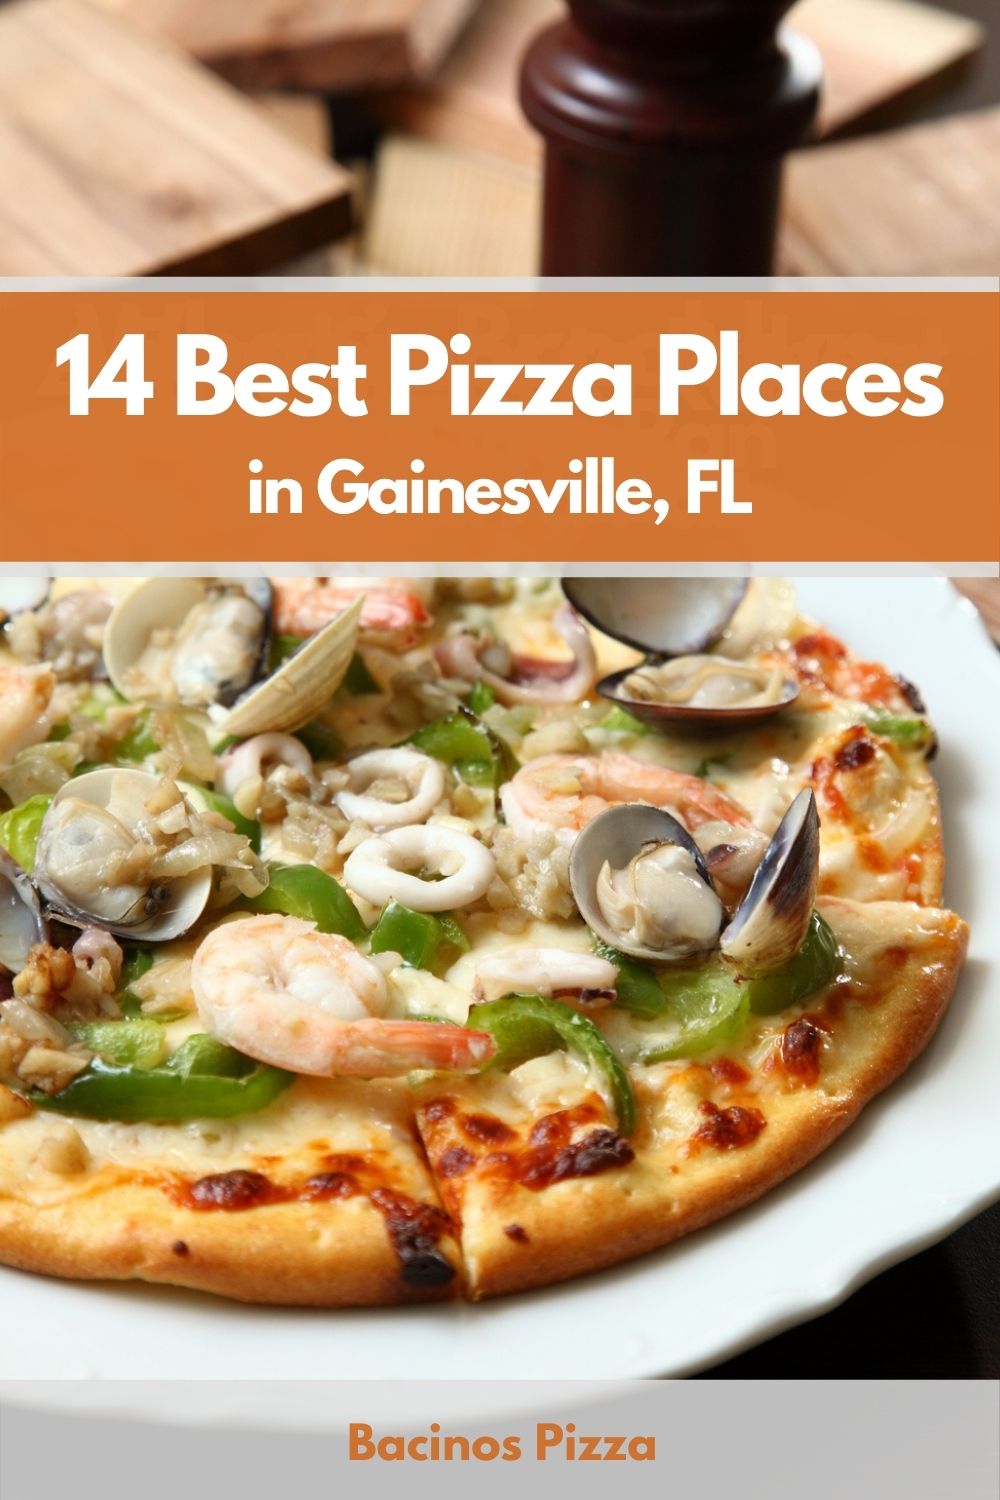 14 Best Pizza Places in Gainesville, FL pin